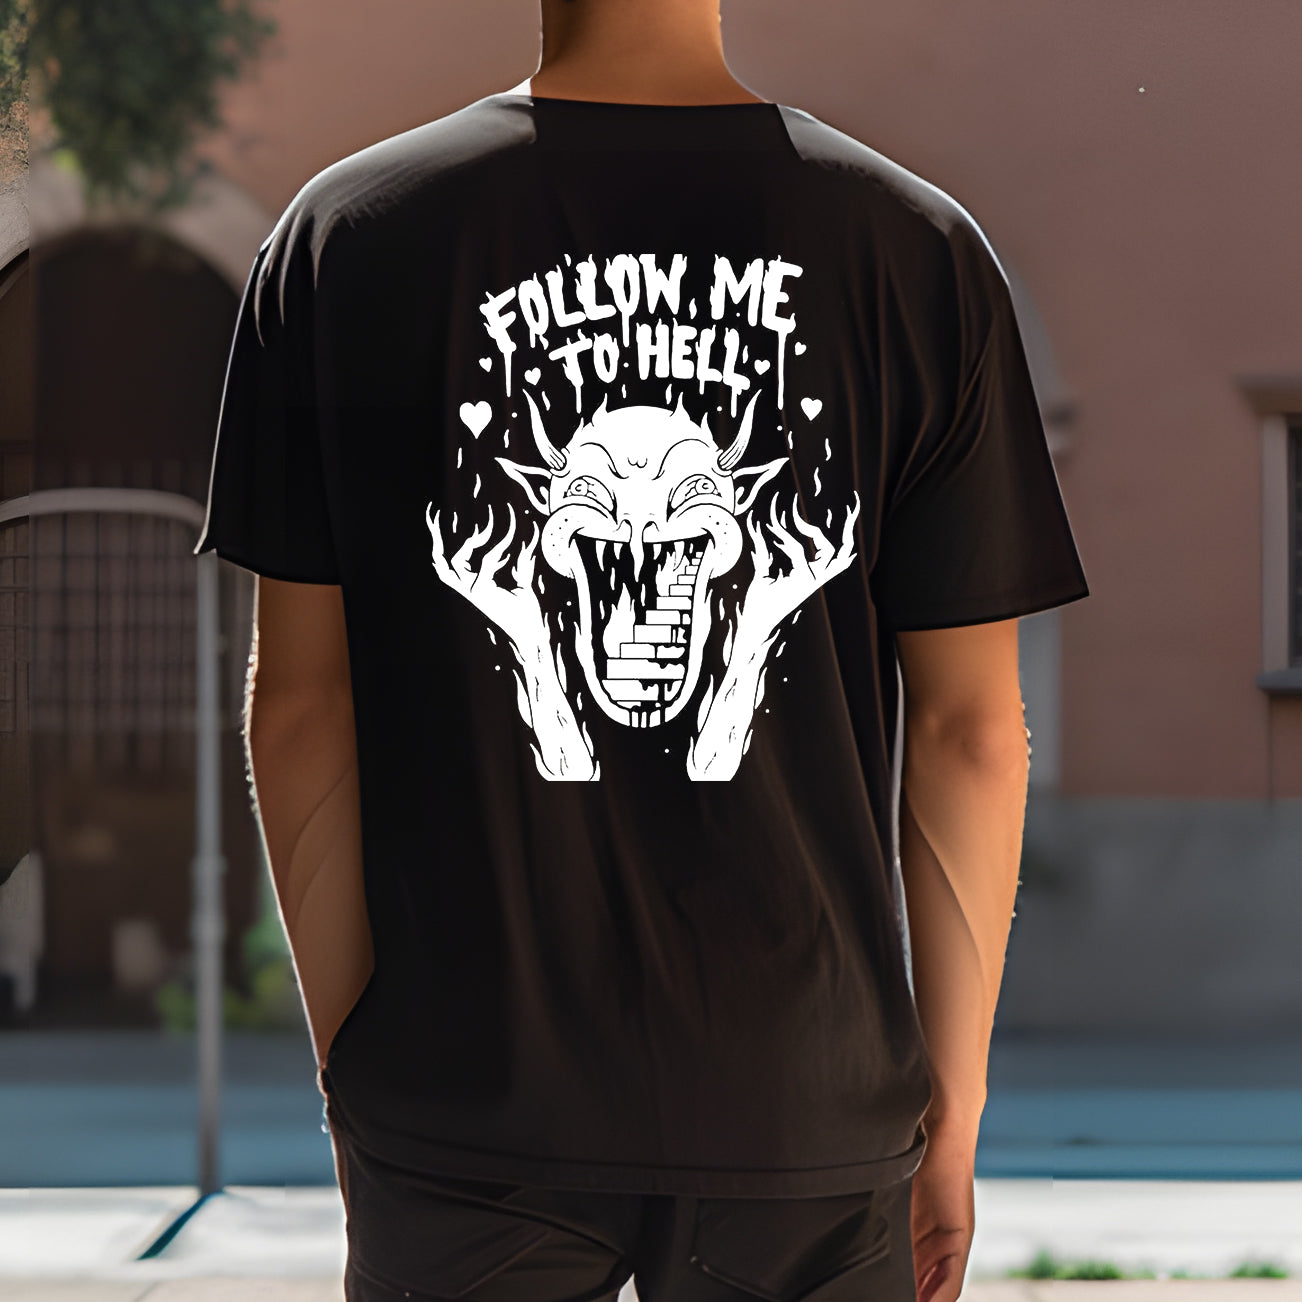 Follow me to Hell Men's Cotton Tee